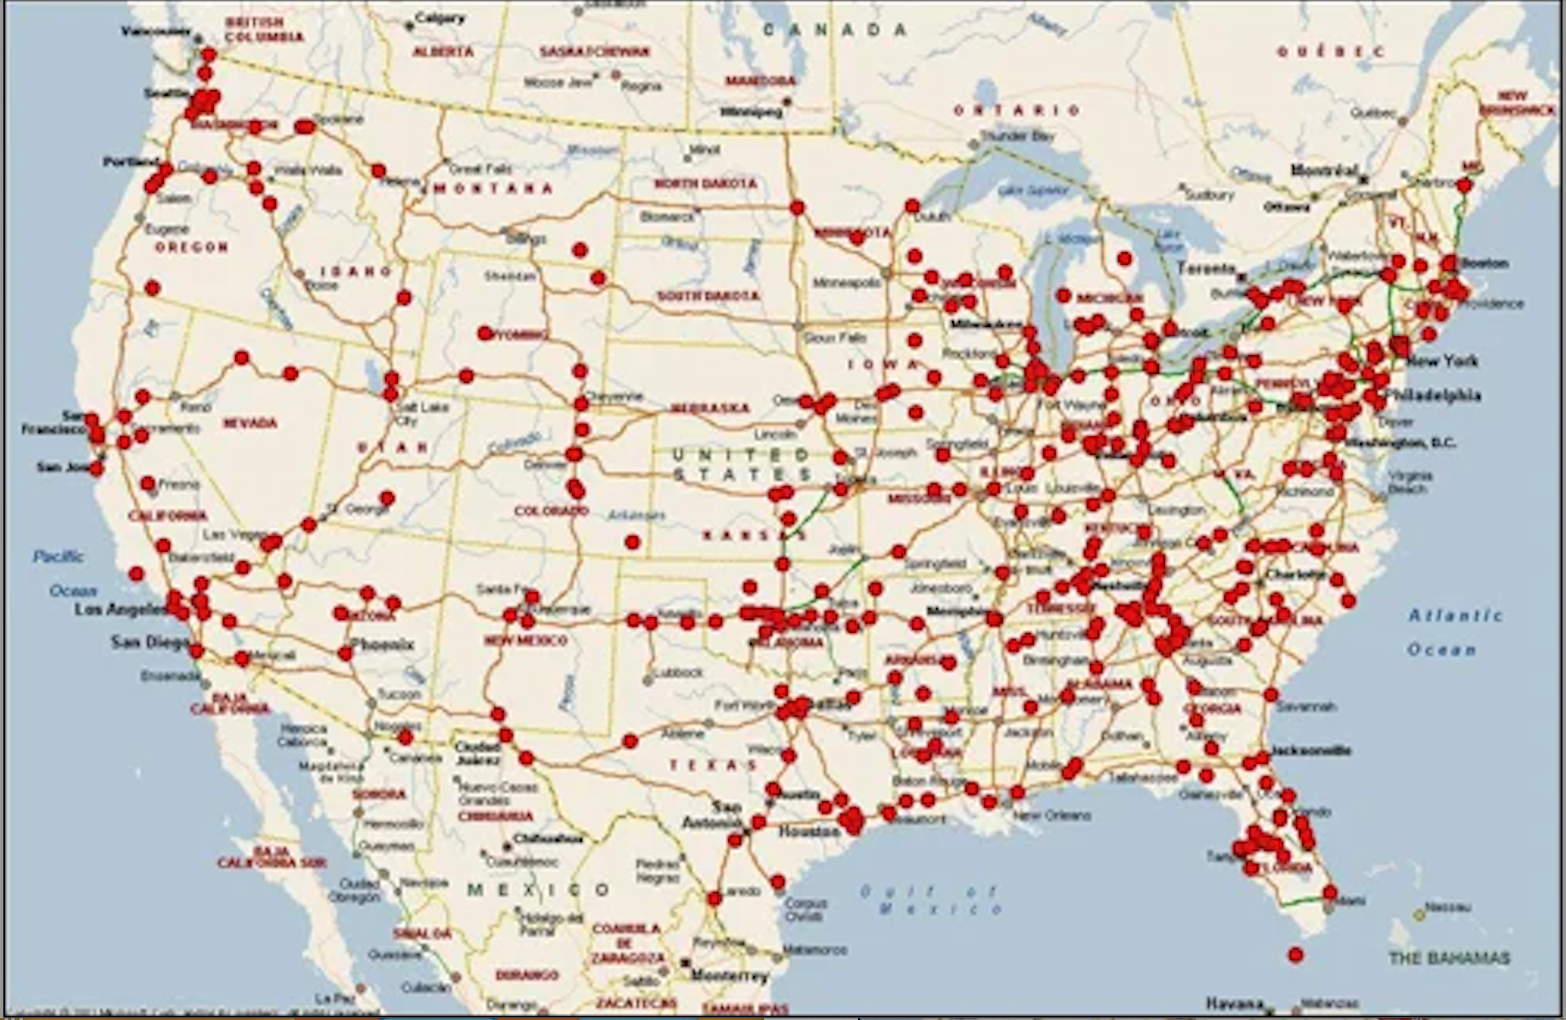 A map created by the Highway Serial Killings initiative is covered with red dots marking the 500 locations where bodies have been discovered along America’s highways over the past 30 years